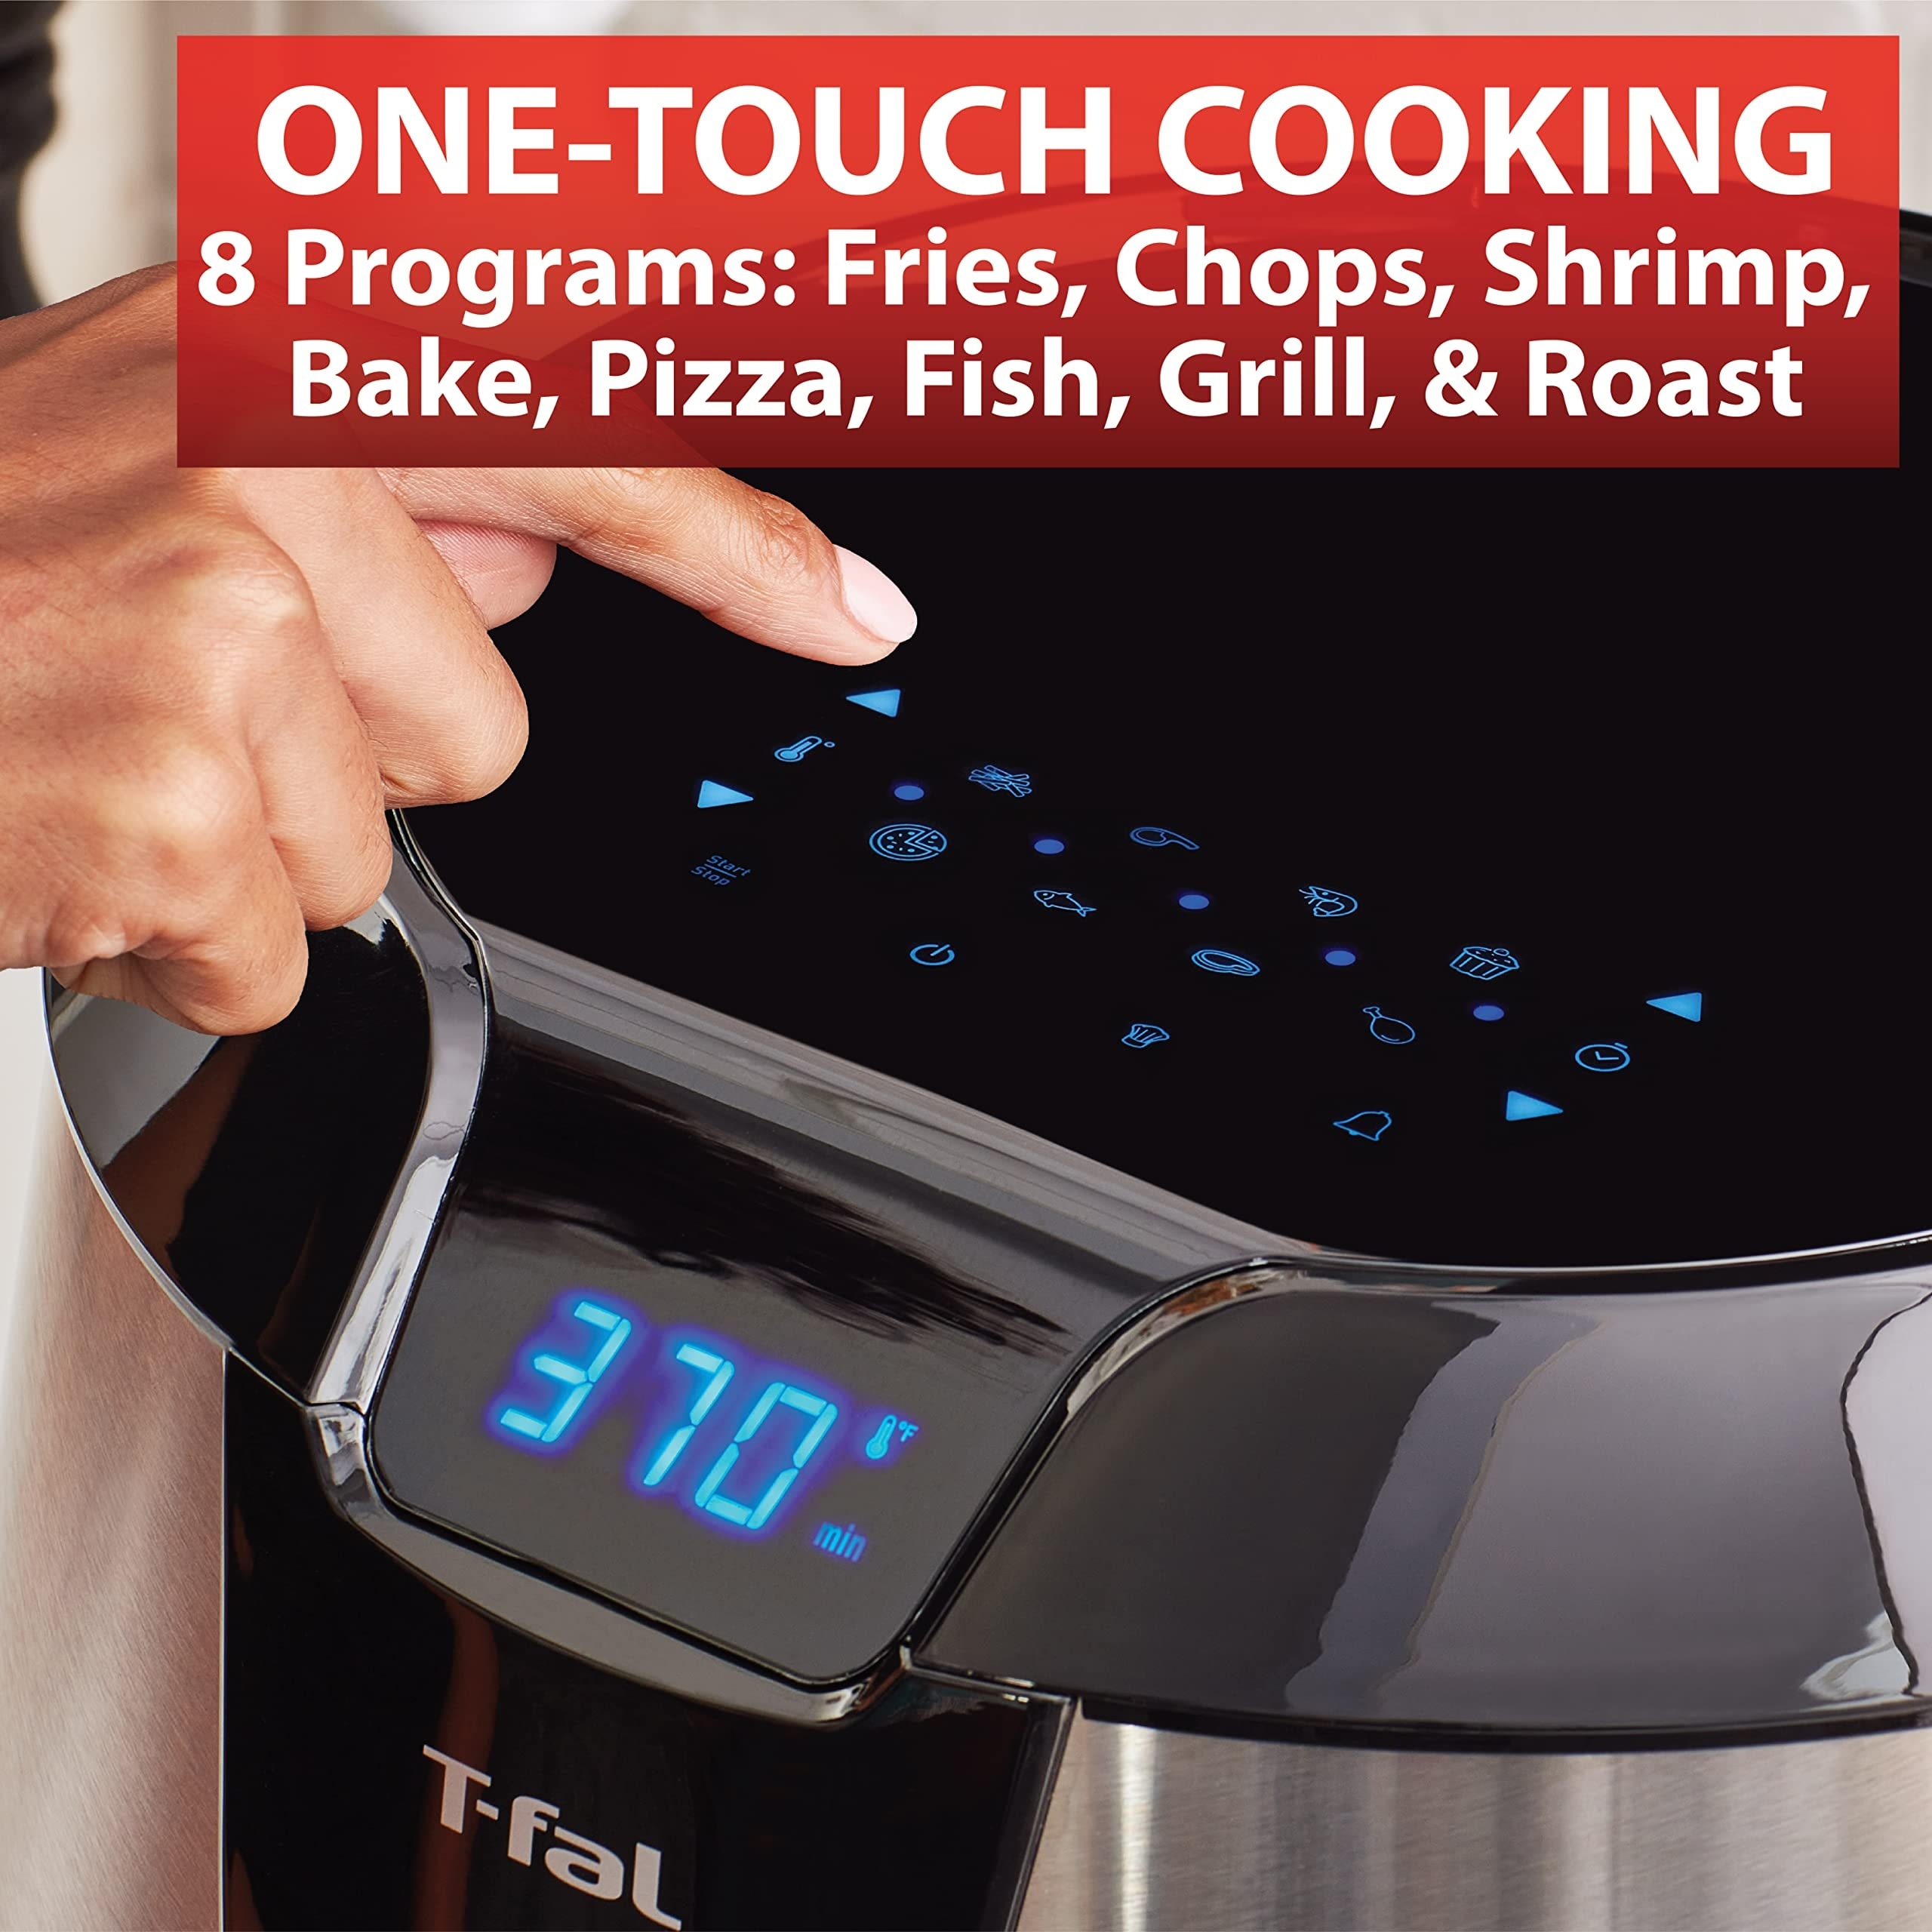 https://ak1.ostkcdn.com/images/products/is/images/direct/4a9ec802582246697ecf5a1bcbb0b0cc604bc188/Easy-Fry-XXL-Air-Fryer-%26-Grill-Combo-with-One-Touch-Screen%2C-8-Preset-Programs%2C-5.9-quarts%2C-Stainless-Steel.jpg